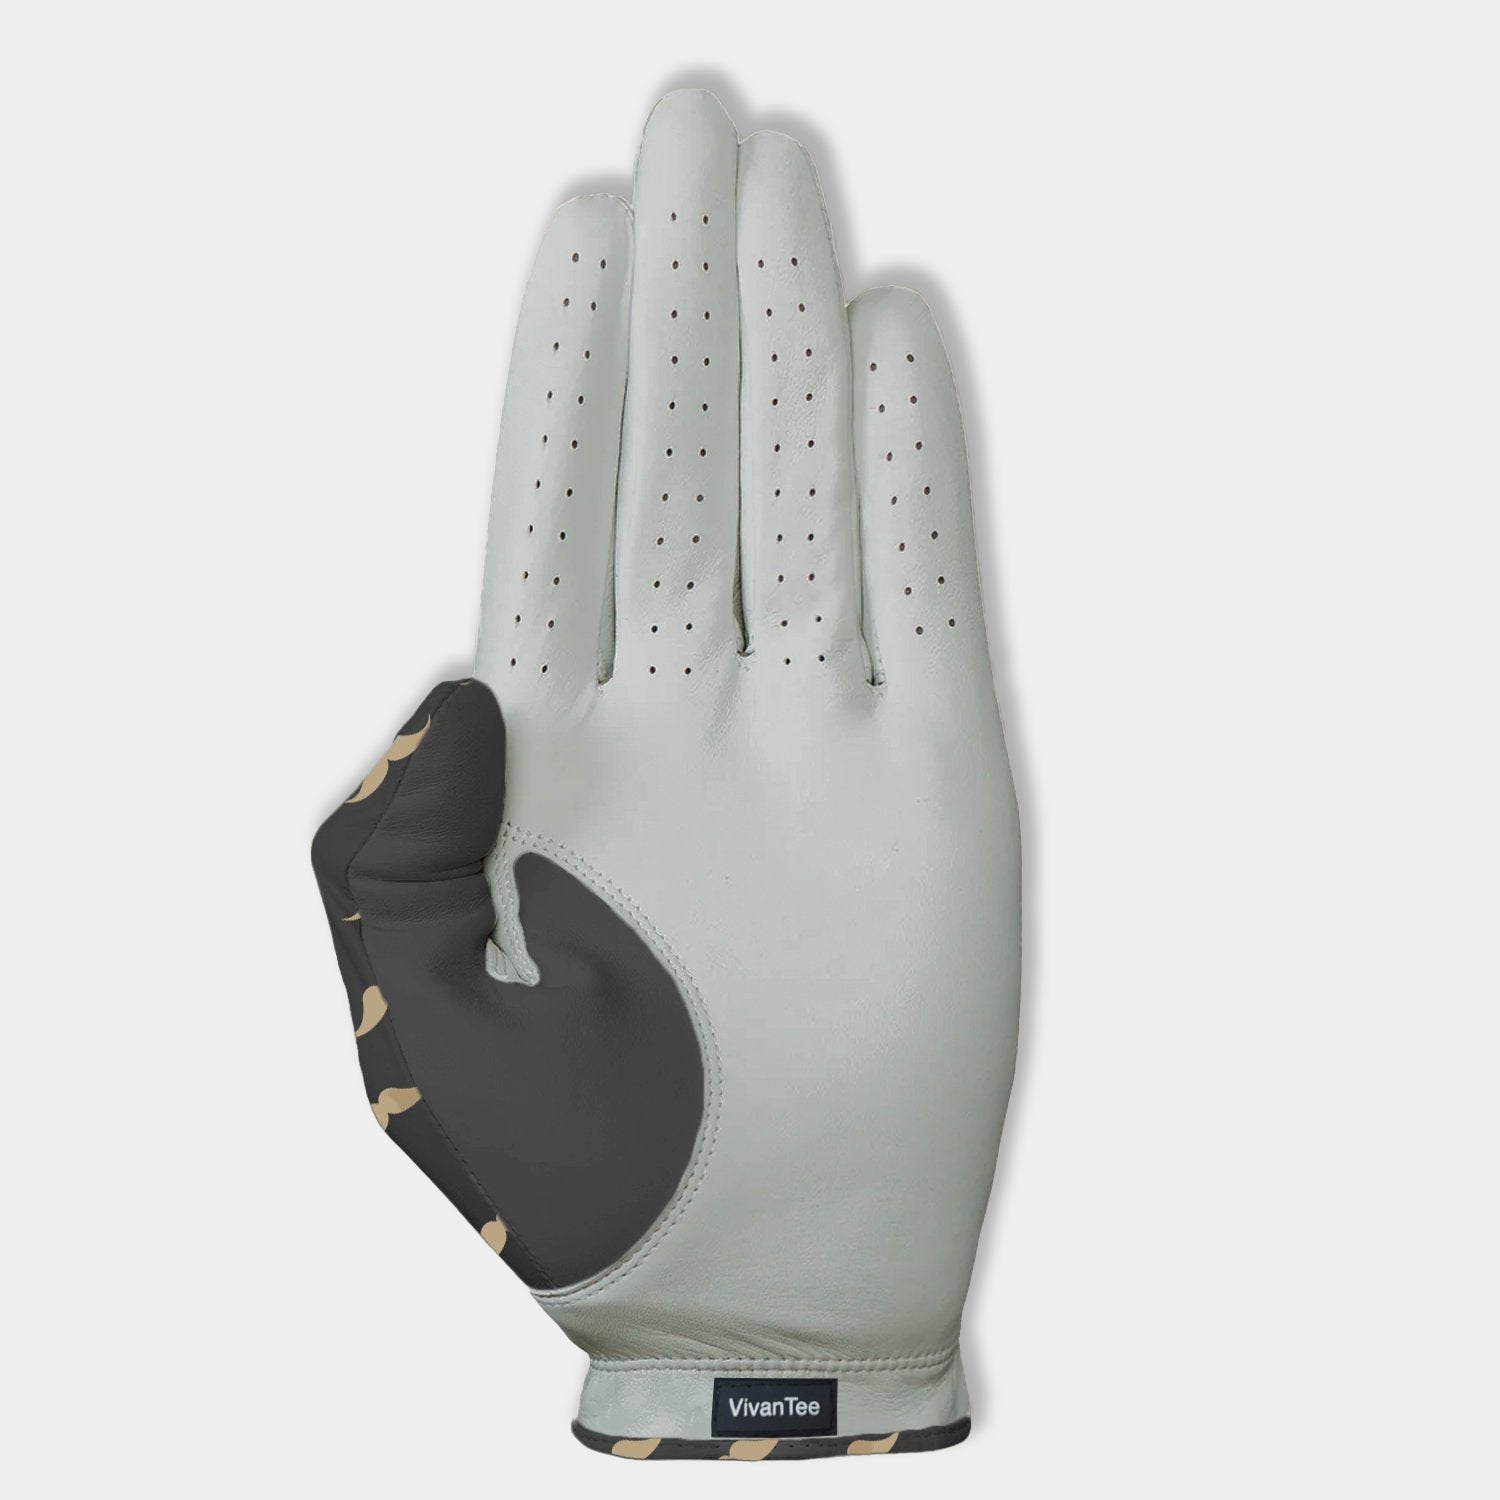 Bottom of Wooly-burg golf glove for women, charcoal and light grey colored golf glove.